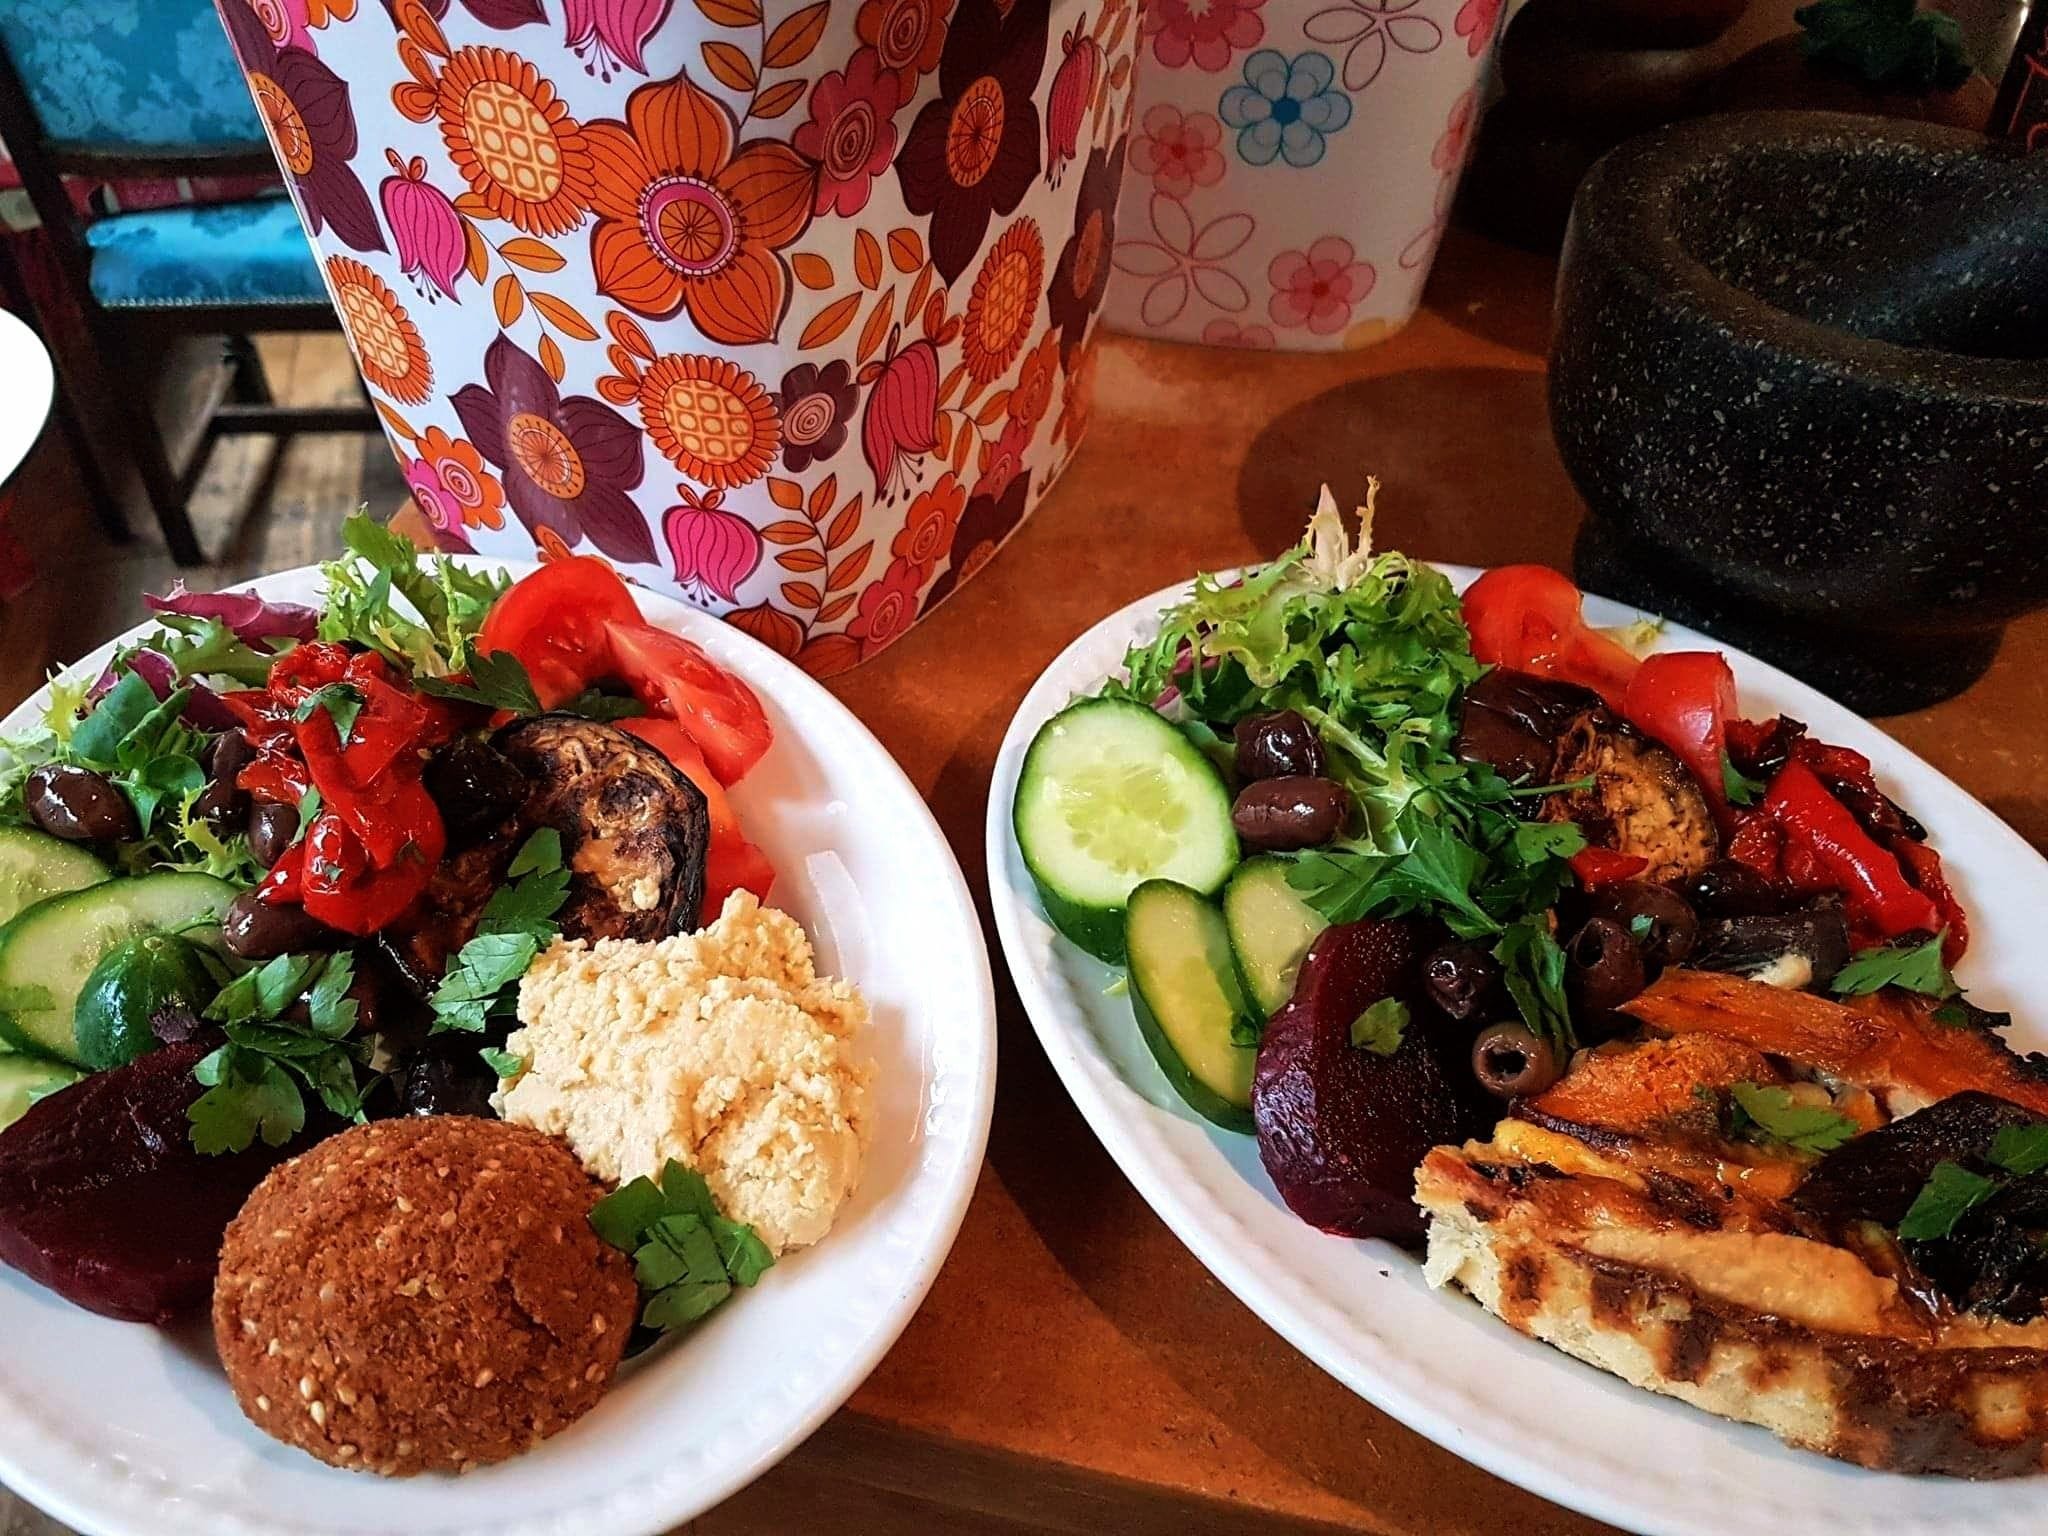 tow plates of salad in front of a colourful 1970s flowery box.
One plate has salad leaves, red peppers, hummus and falafels, the other has salad with quiche